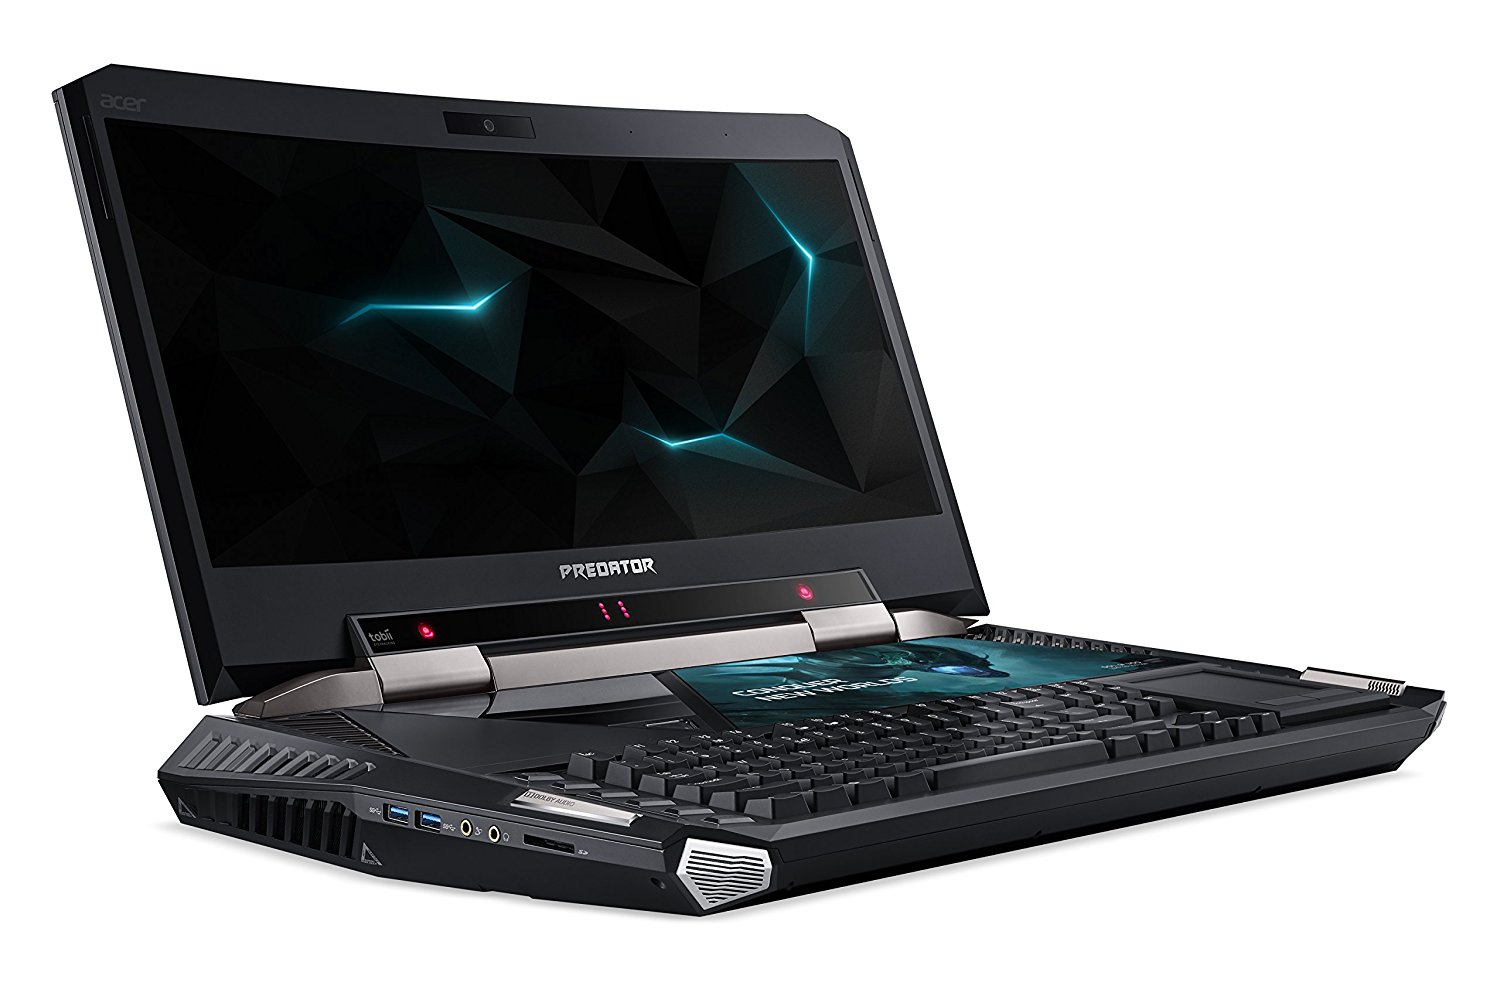 Acer Predator 21X curved screen gaming laptop to hit Indian market